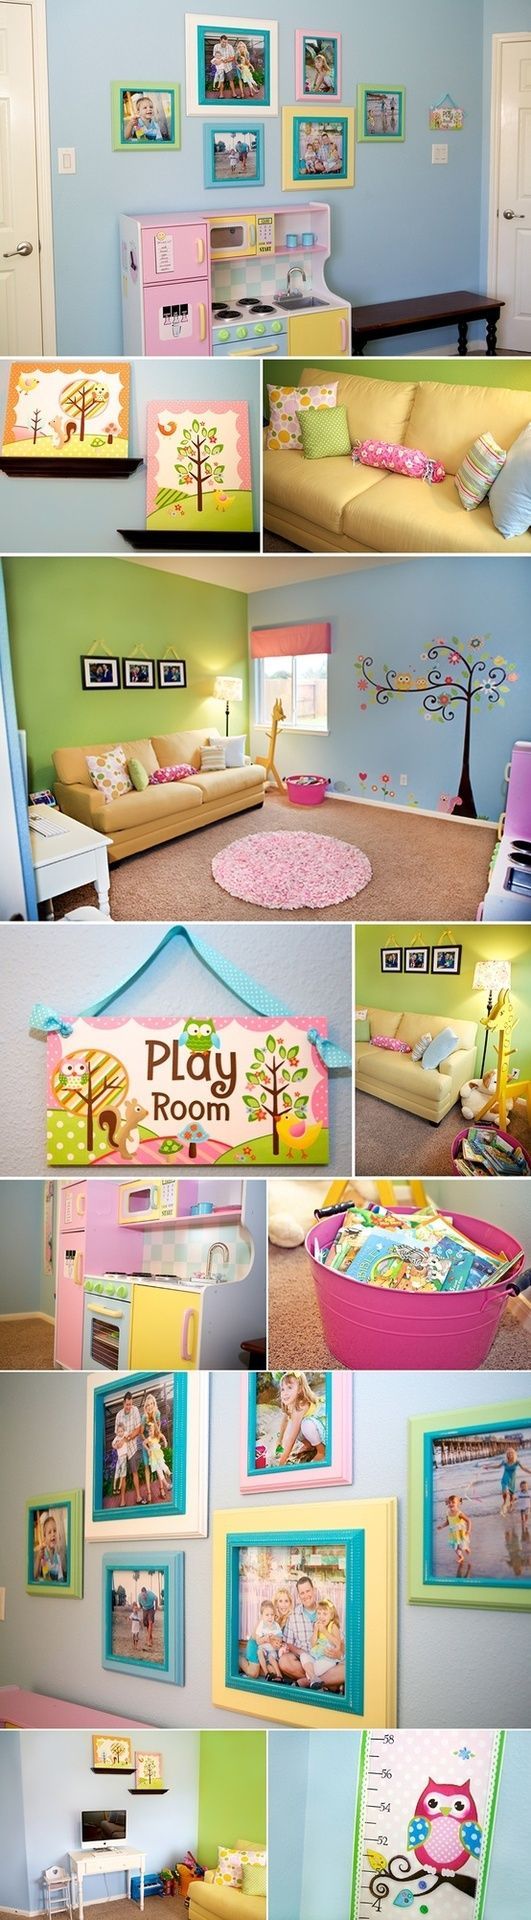 The perfect playroom – just need to change colors for a boys version!